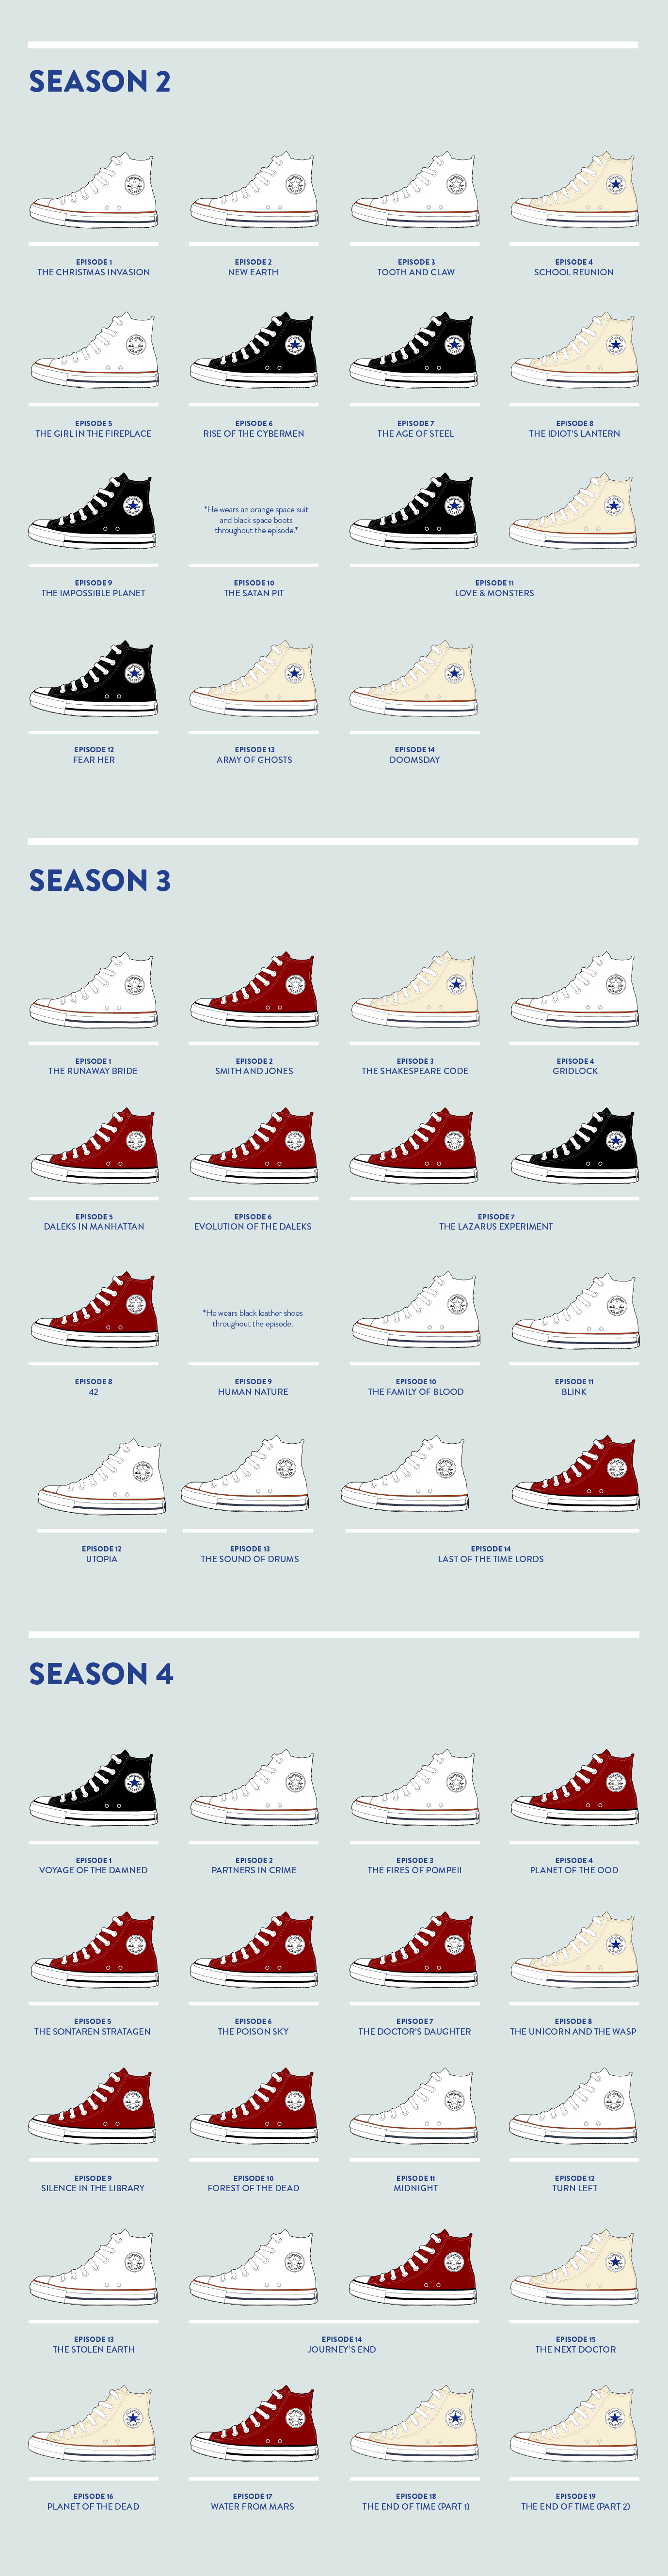 10th doctor converse